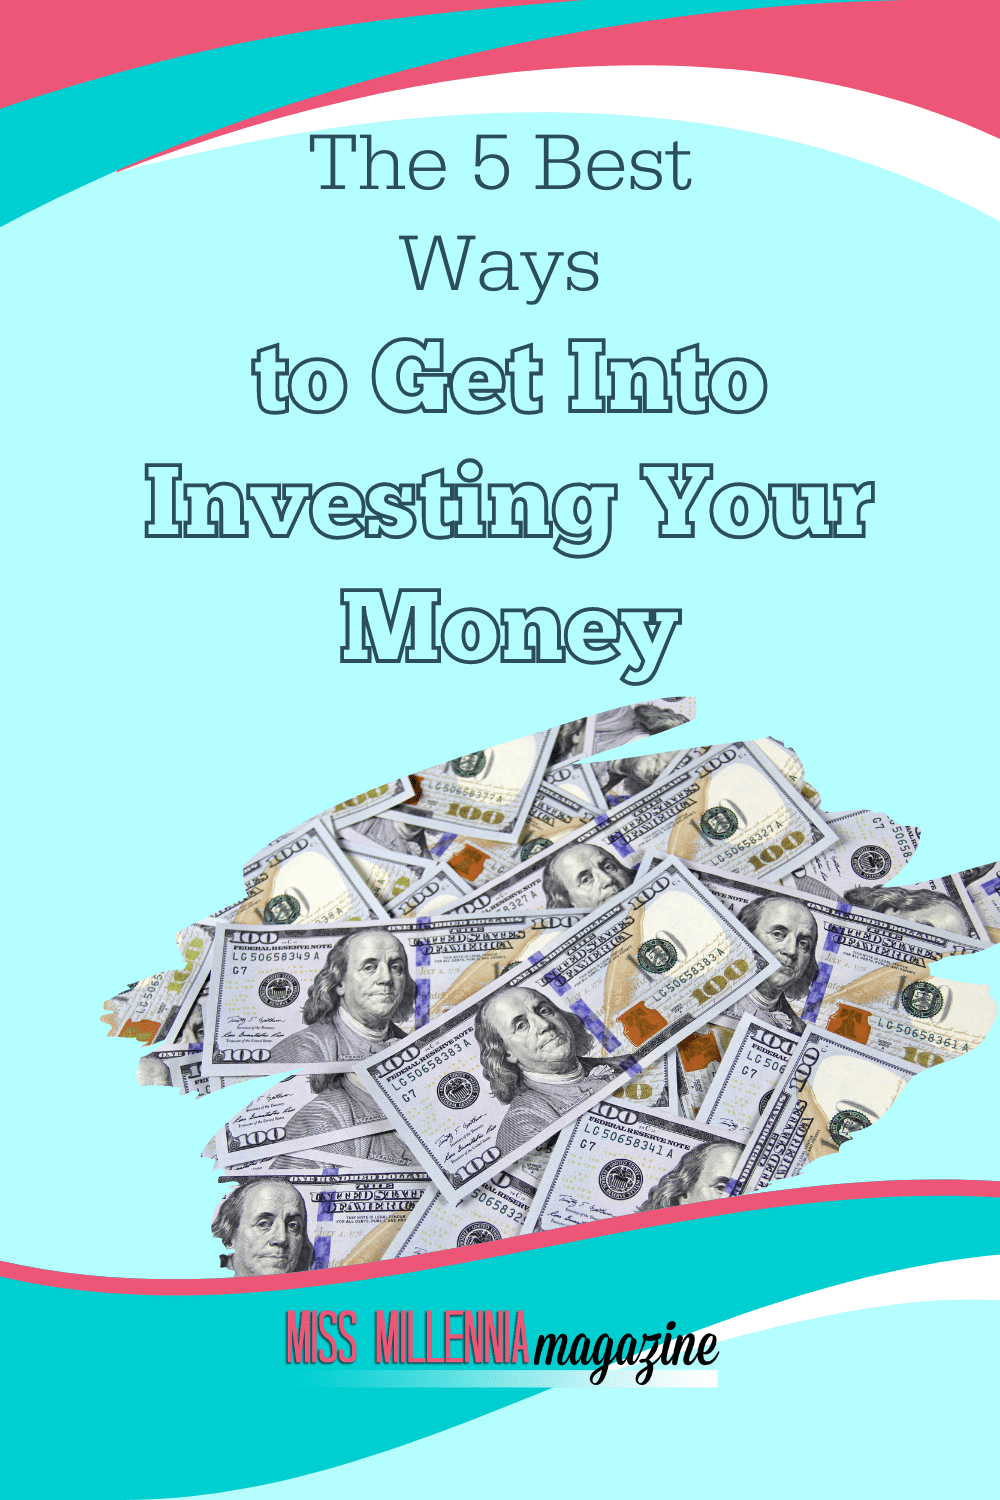 The 5 Best Ways to Get Into Investing Your Money